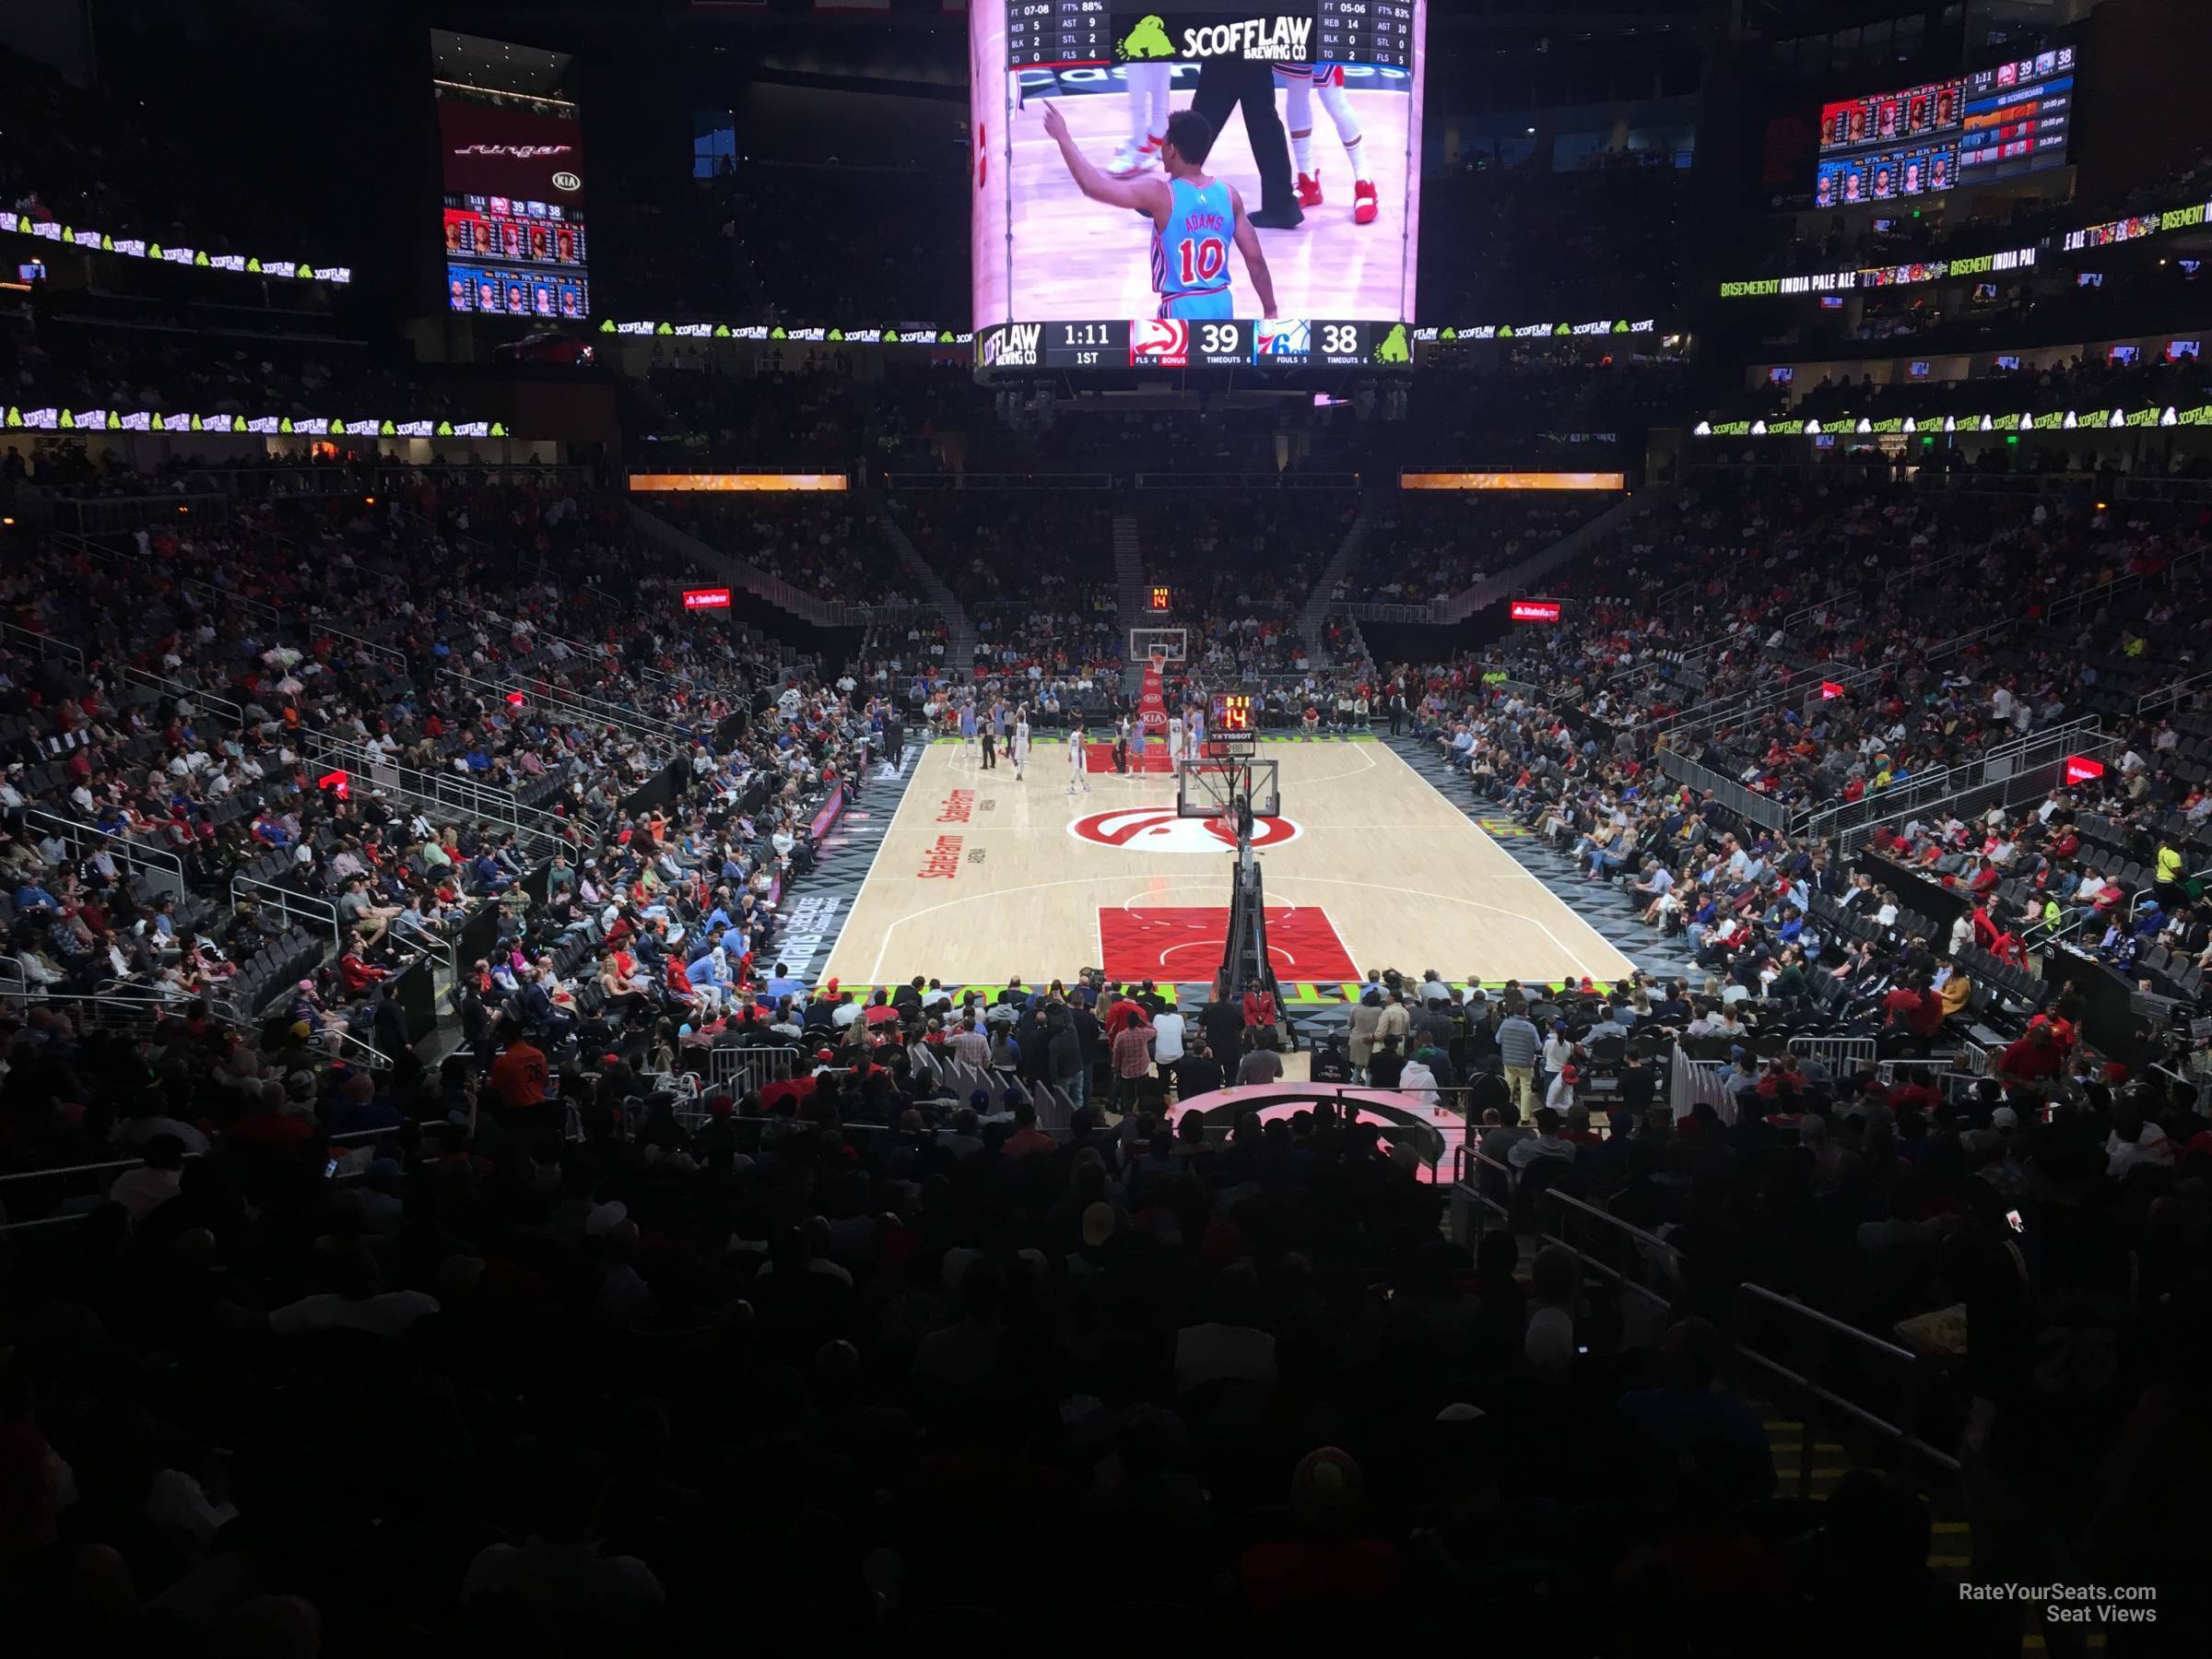 section 114, row u seat view  for basketball - state farm arena